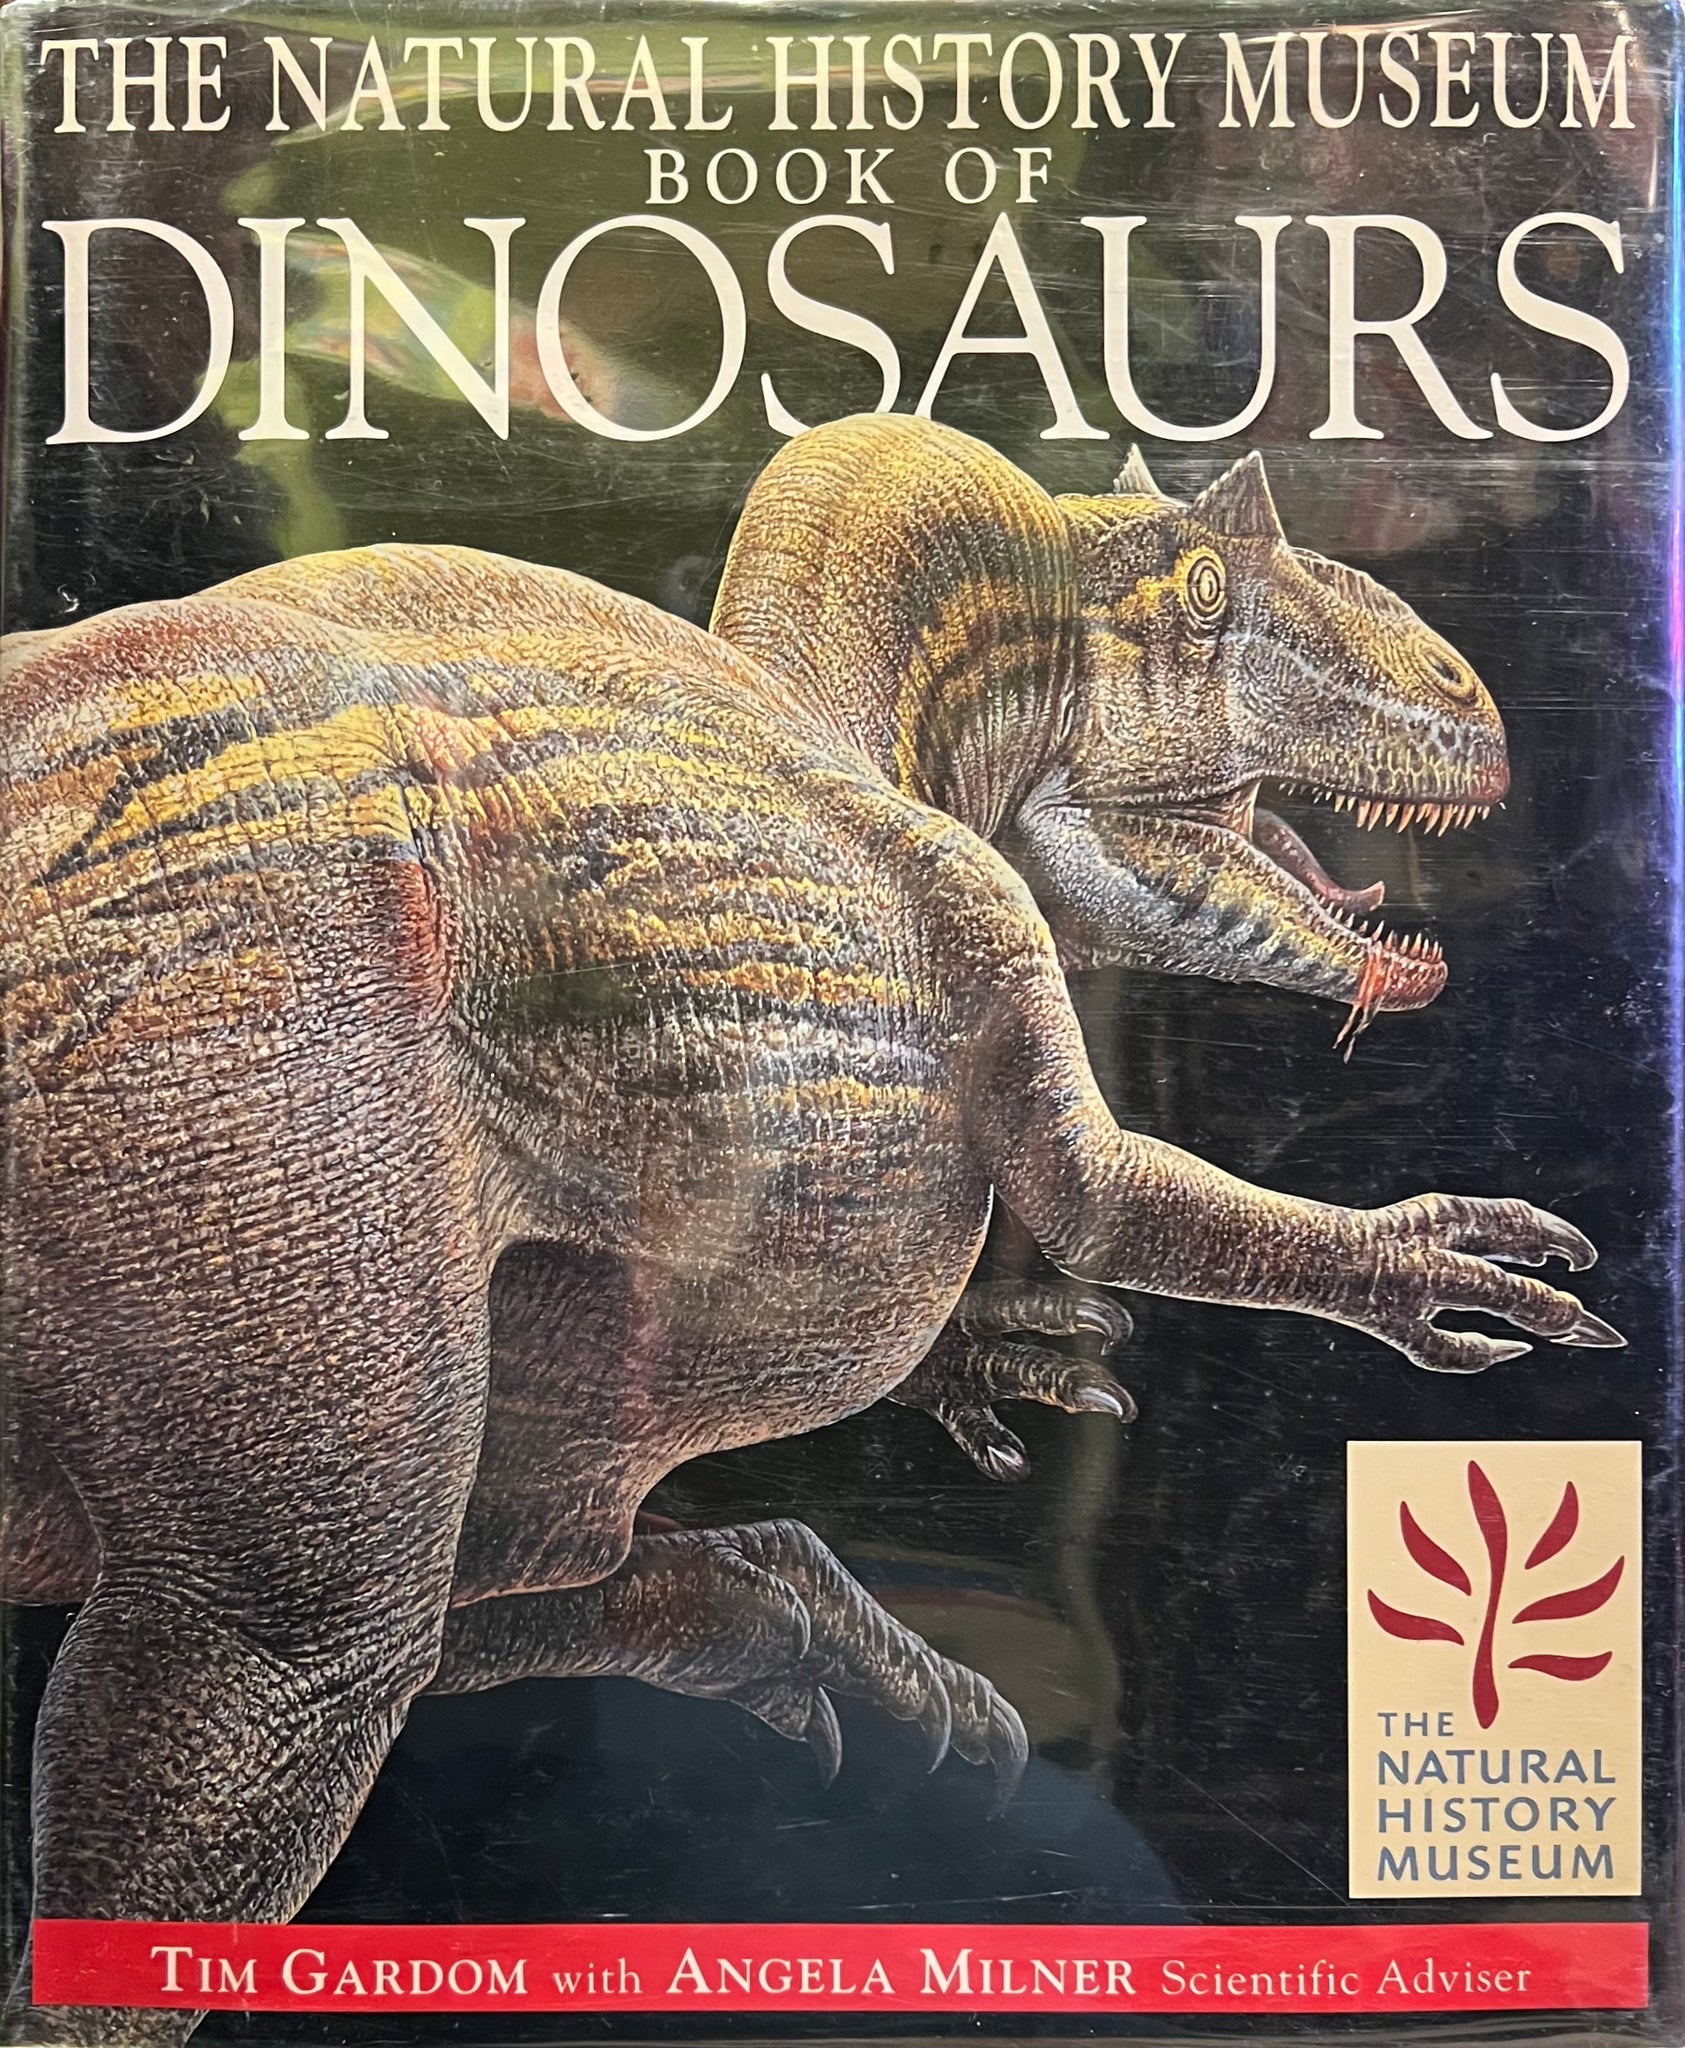 The Natural History Museum Book of Dinosaurs, Tim Gardom with Angela Milner